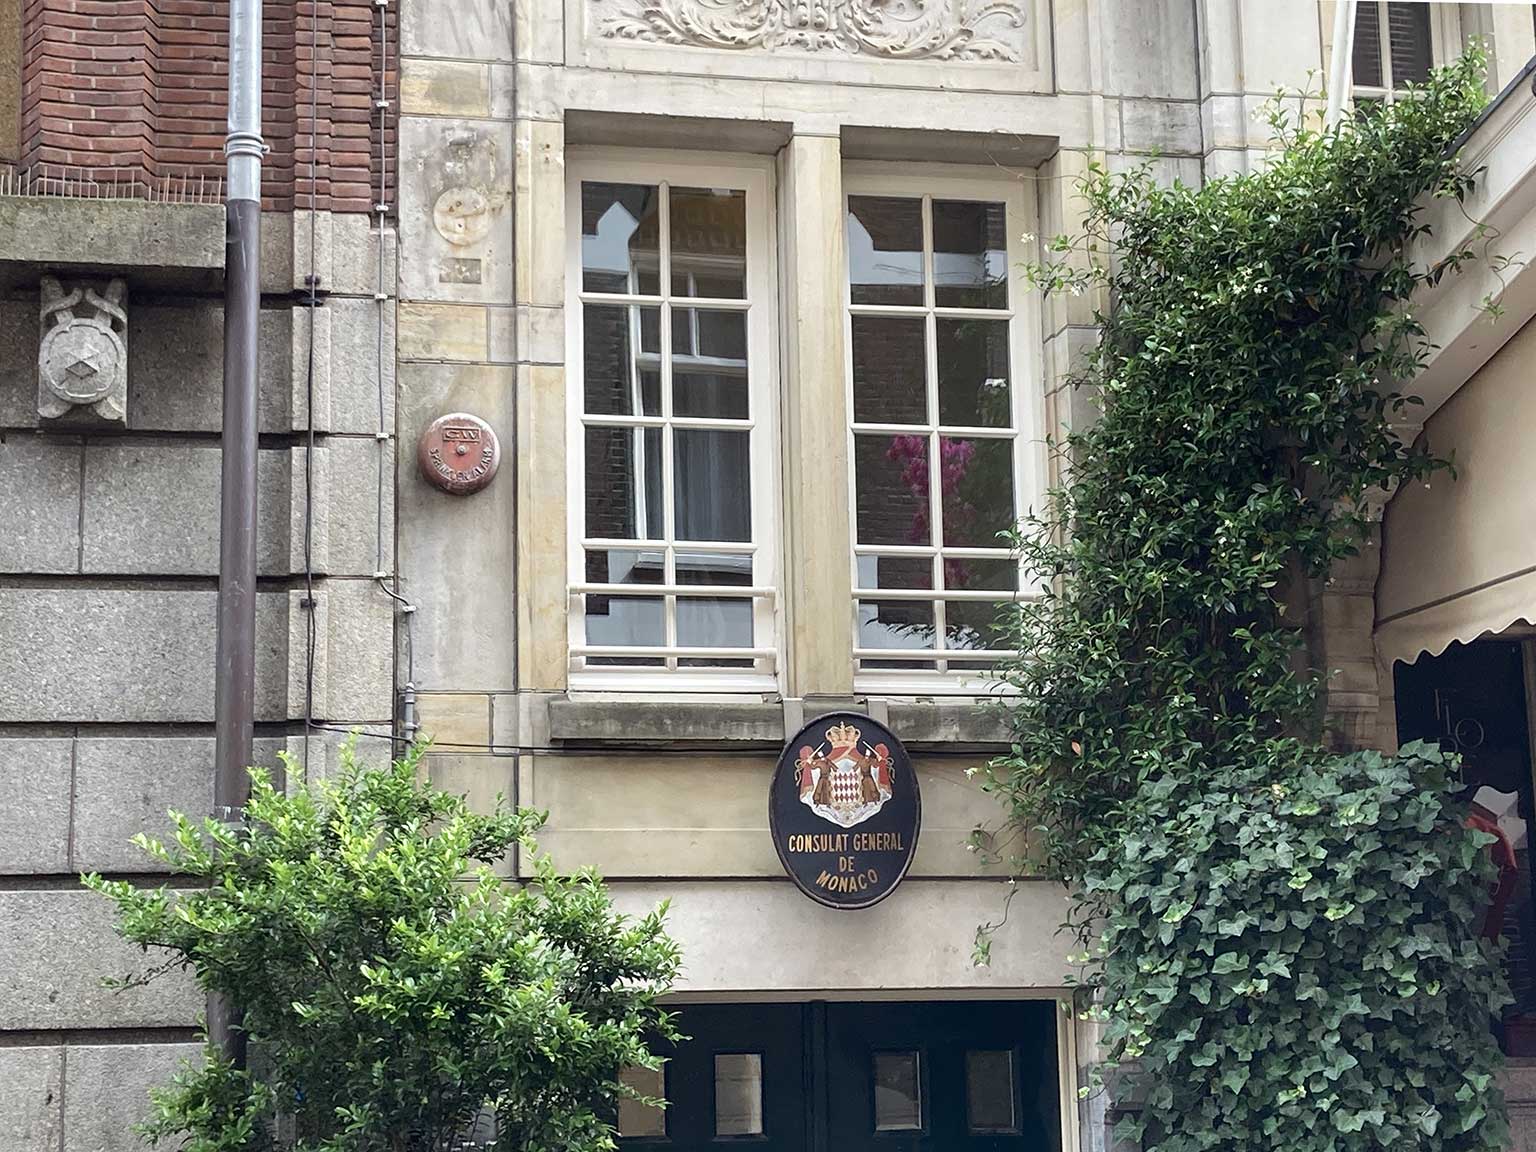 Shield of the Honorary Consulate of Monaco, left of the entrance of De L'Europe, Amsterdam